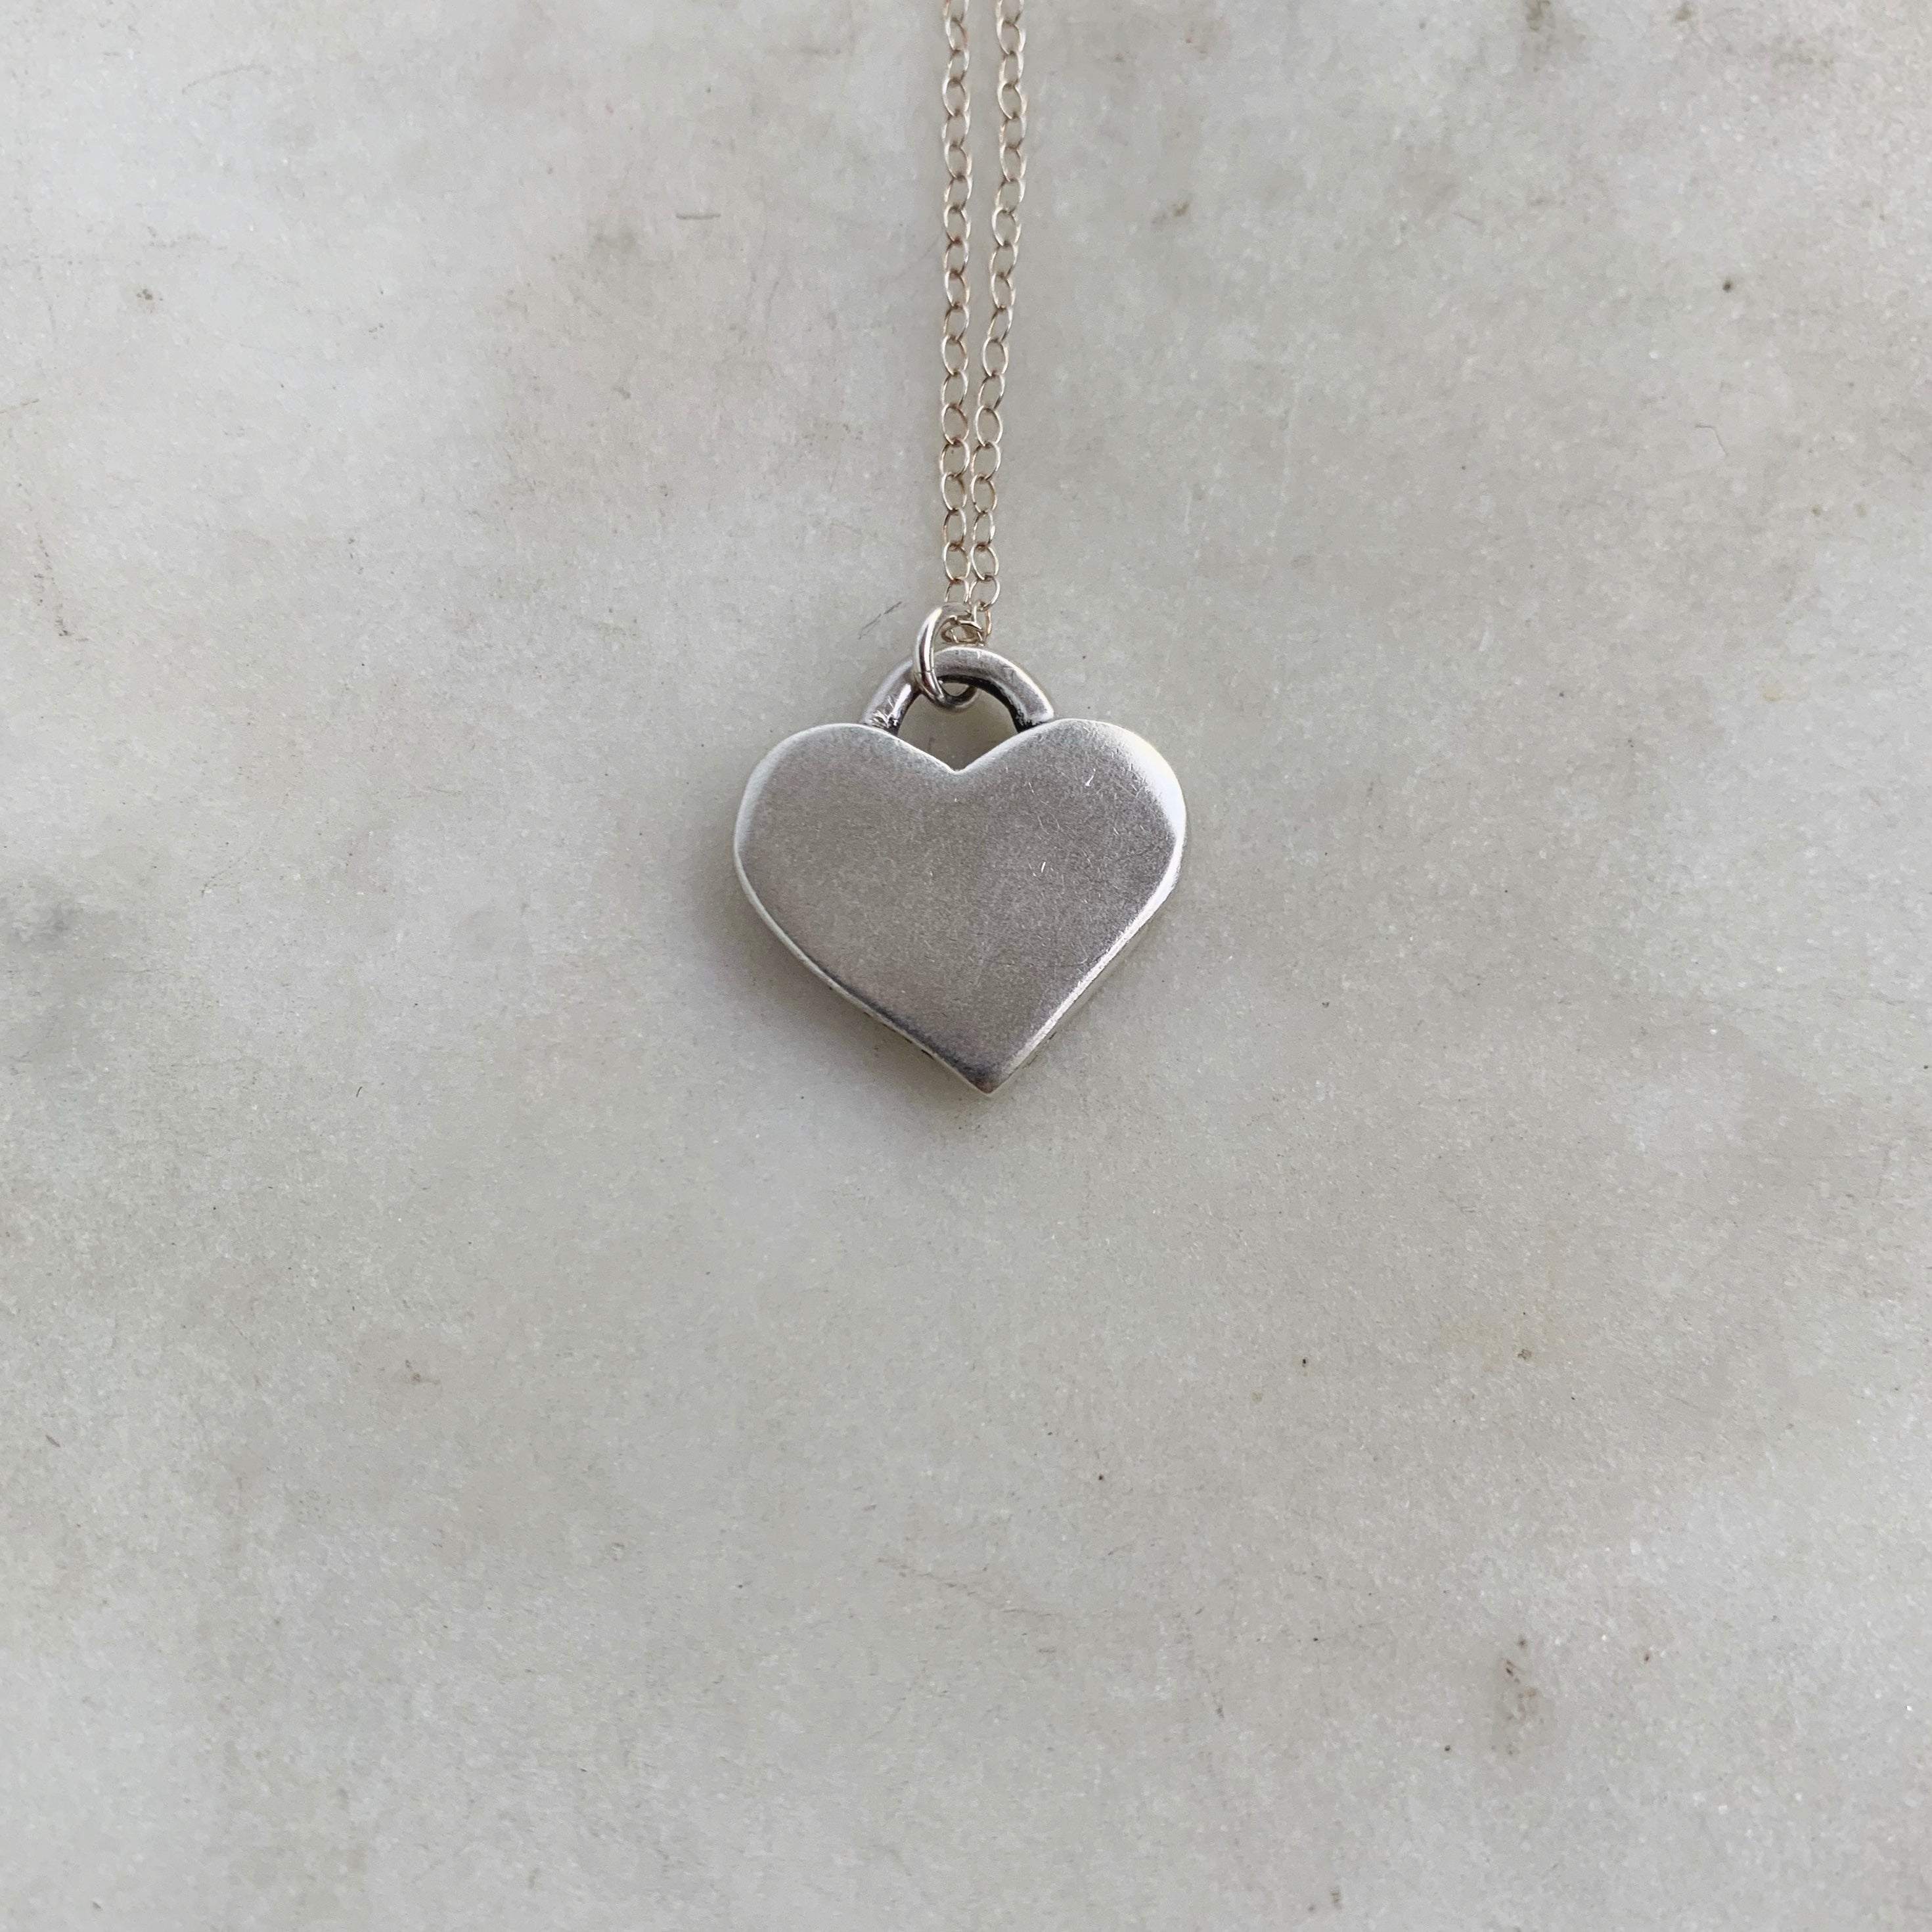 Mothers Charm Necklace with Floating Hearts for Four Children